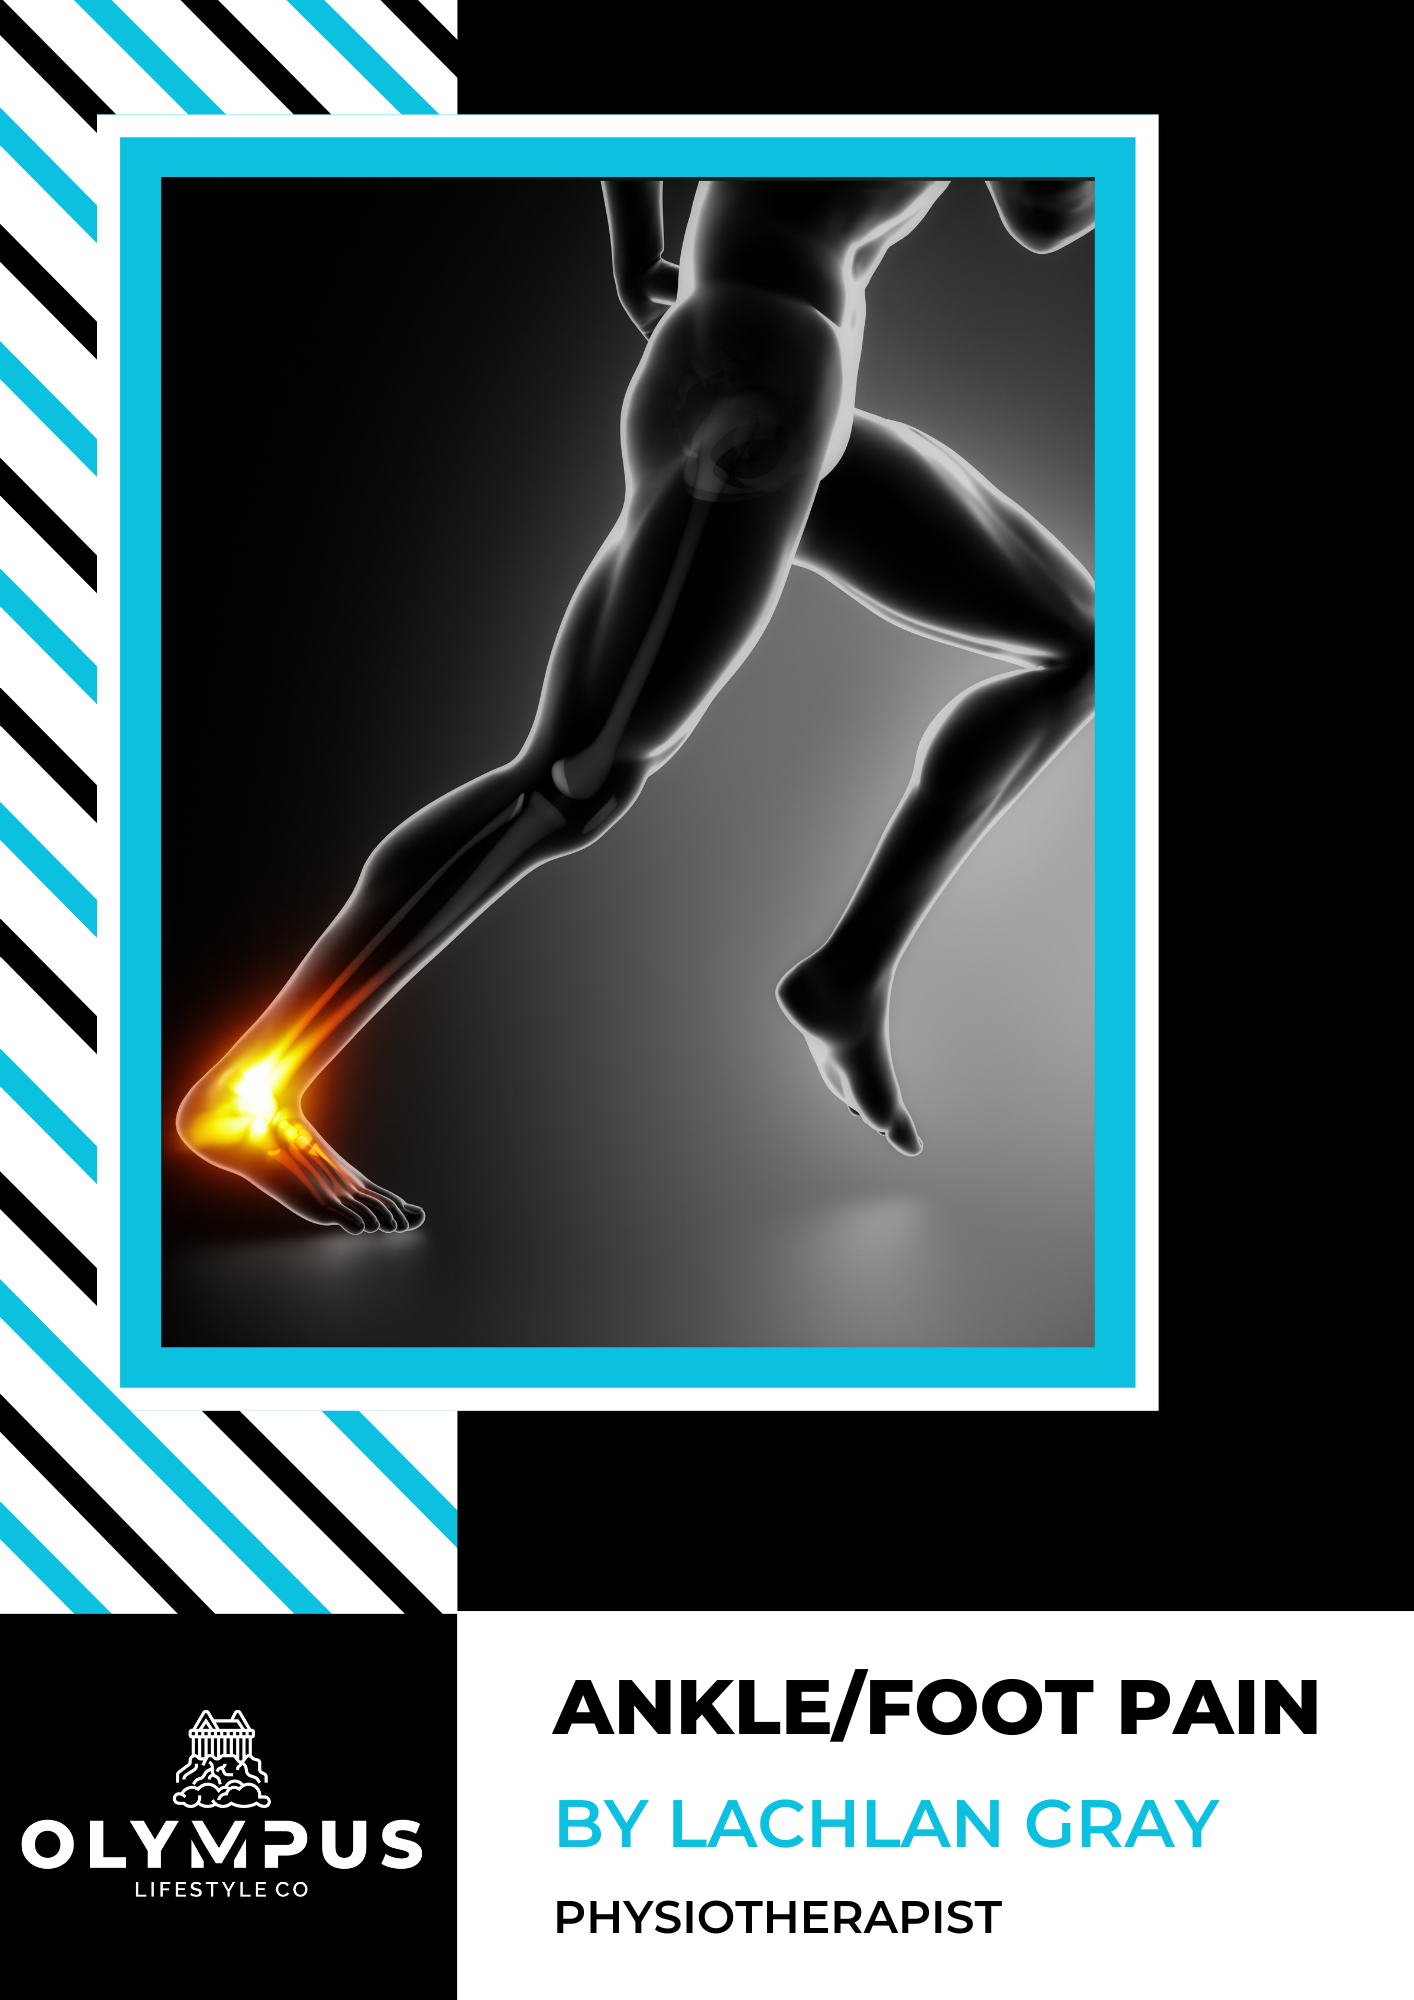 Clinical E-Book Series: Ankle/Foot Pain